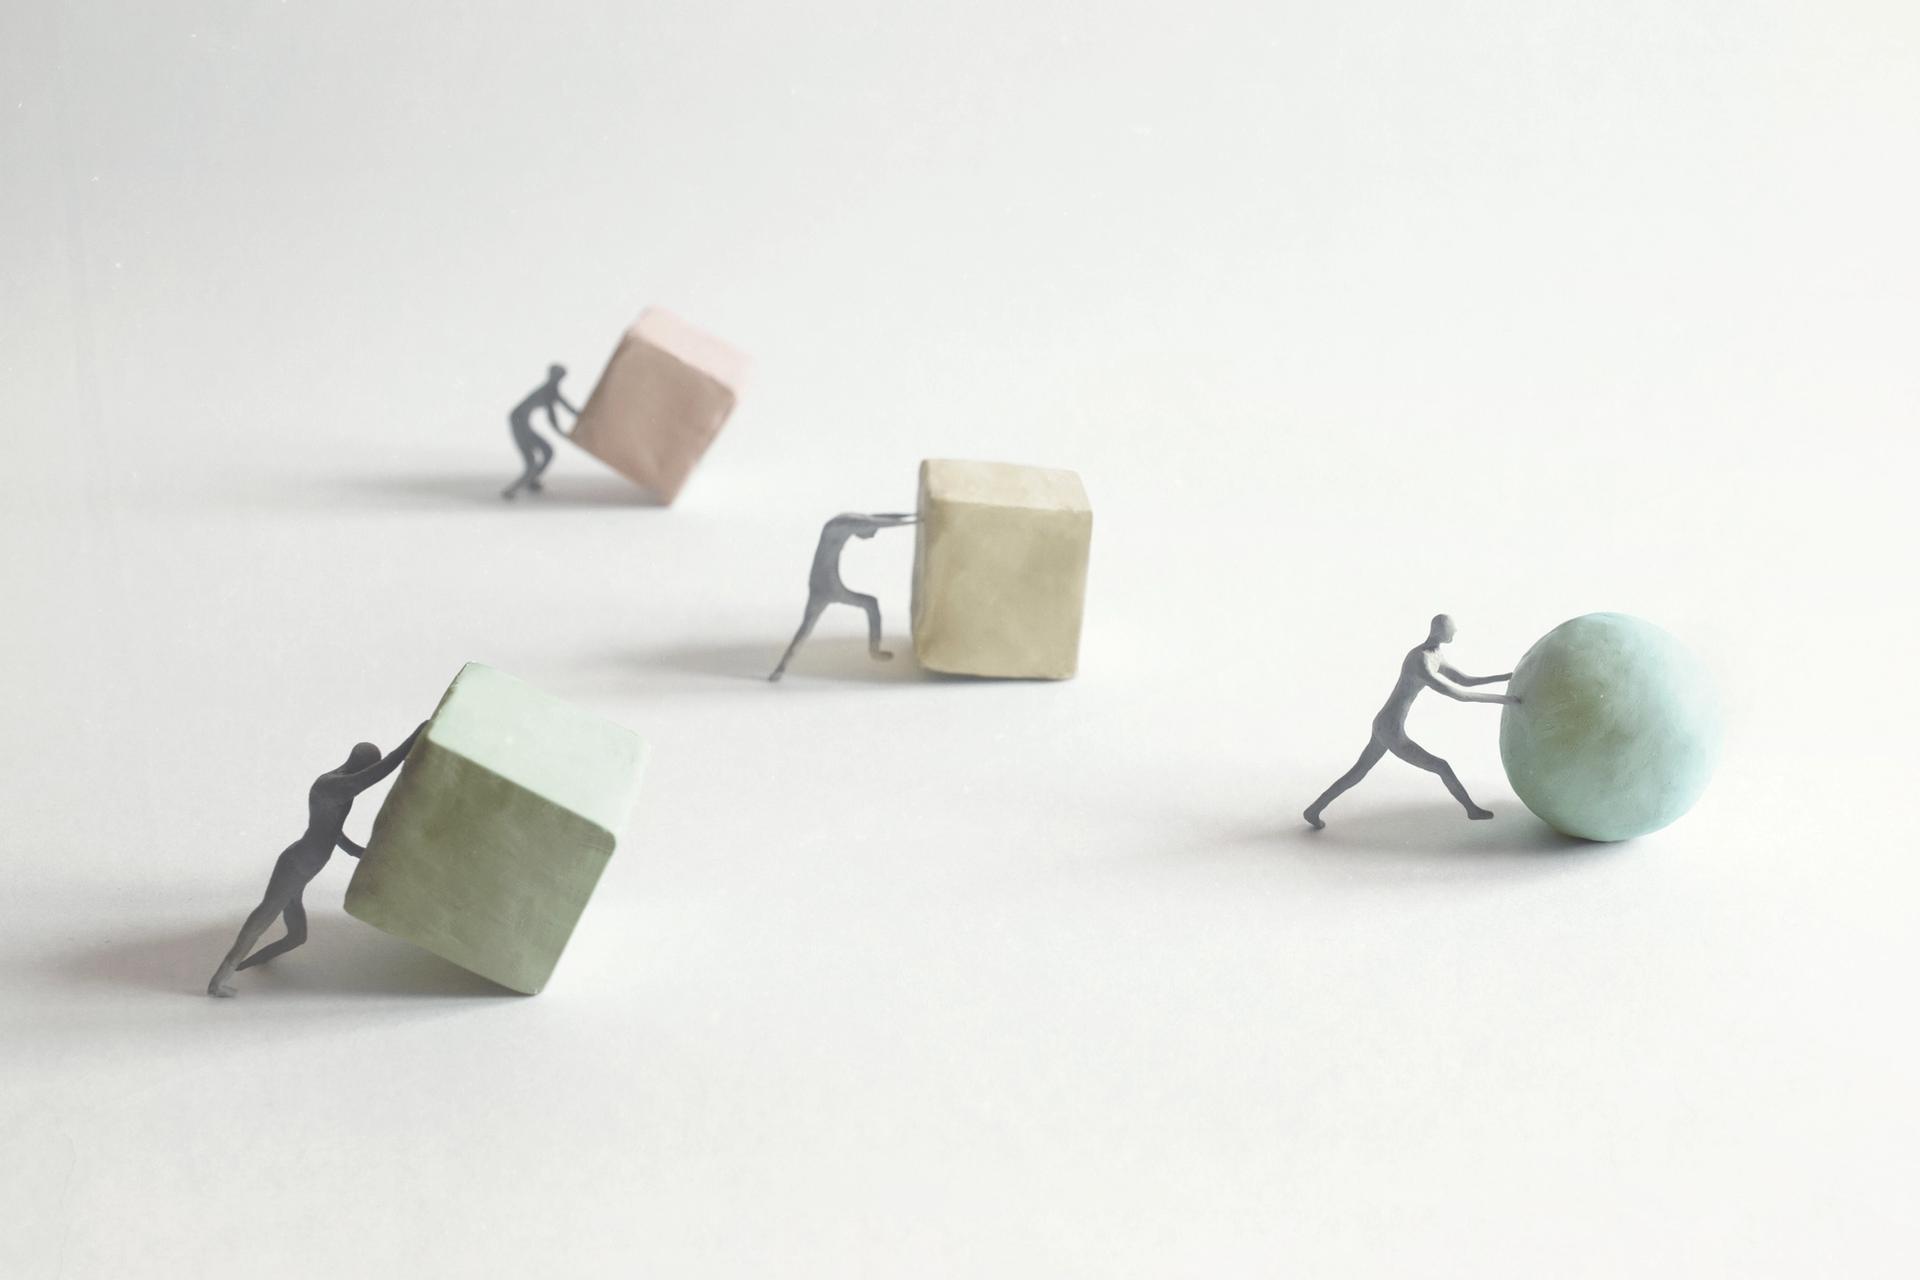 Figures pushing cubes and one figure pushing a ball